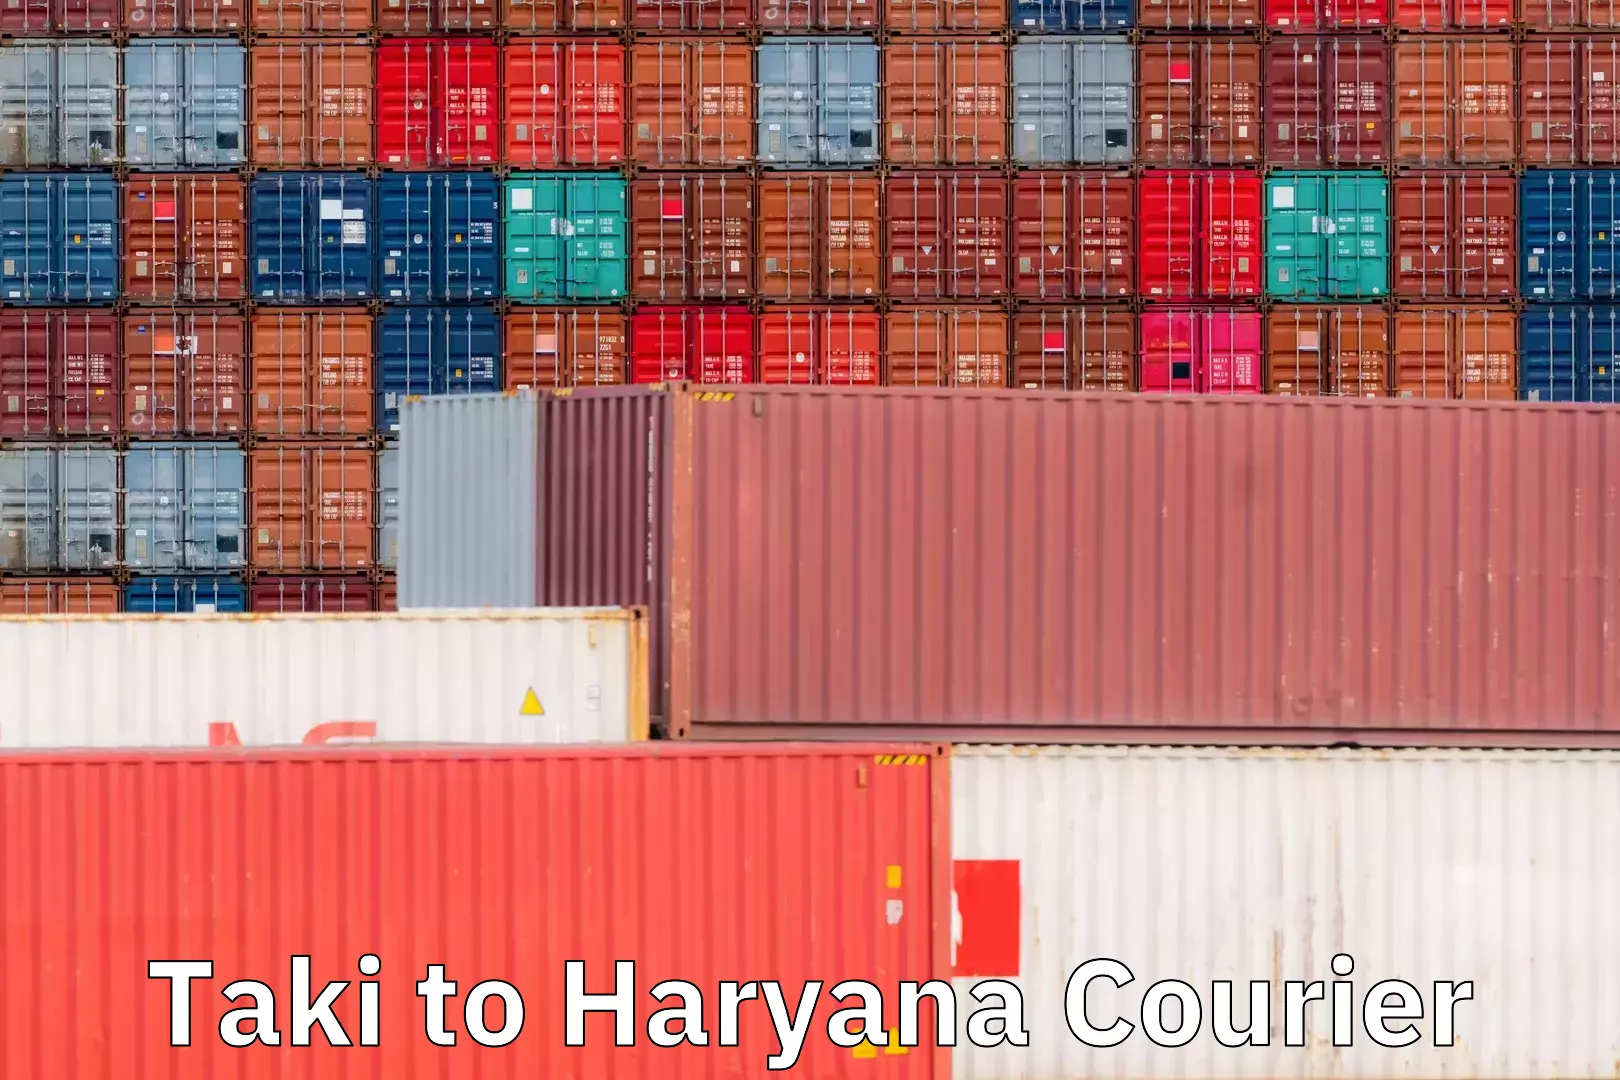 Business delivery service Taki to Haryana